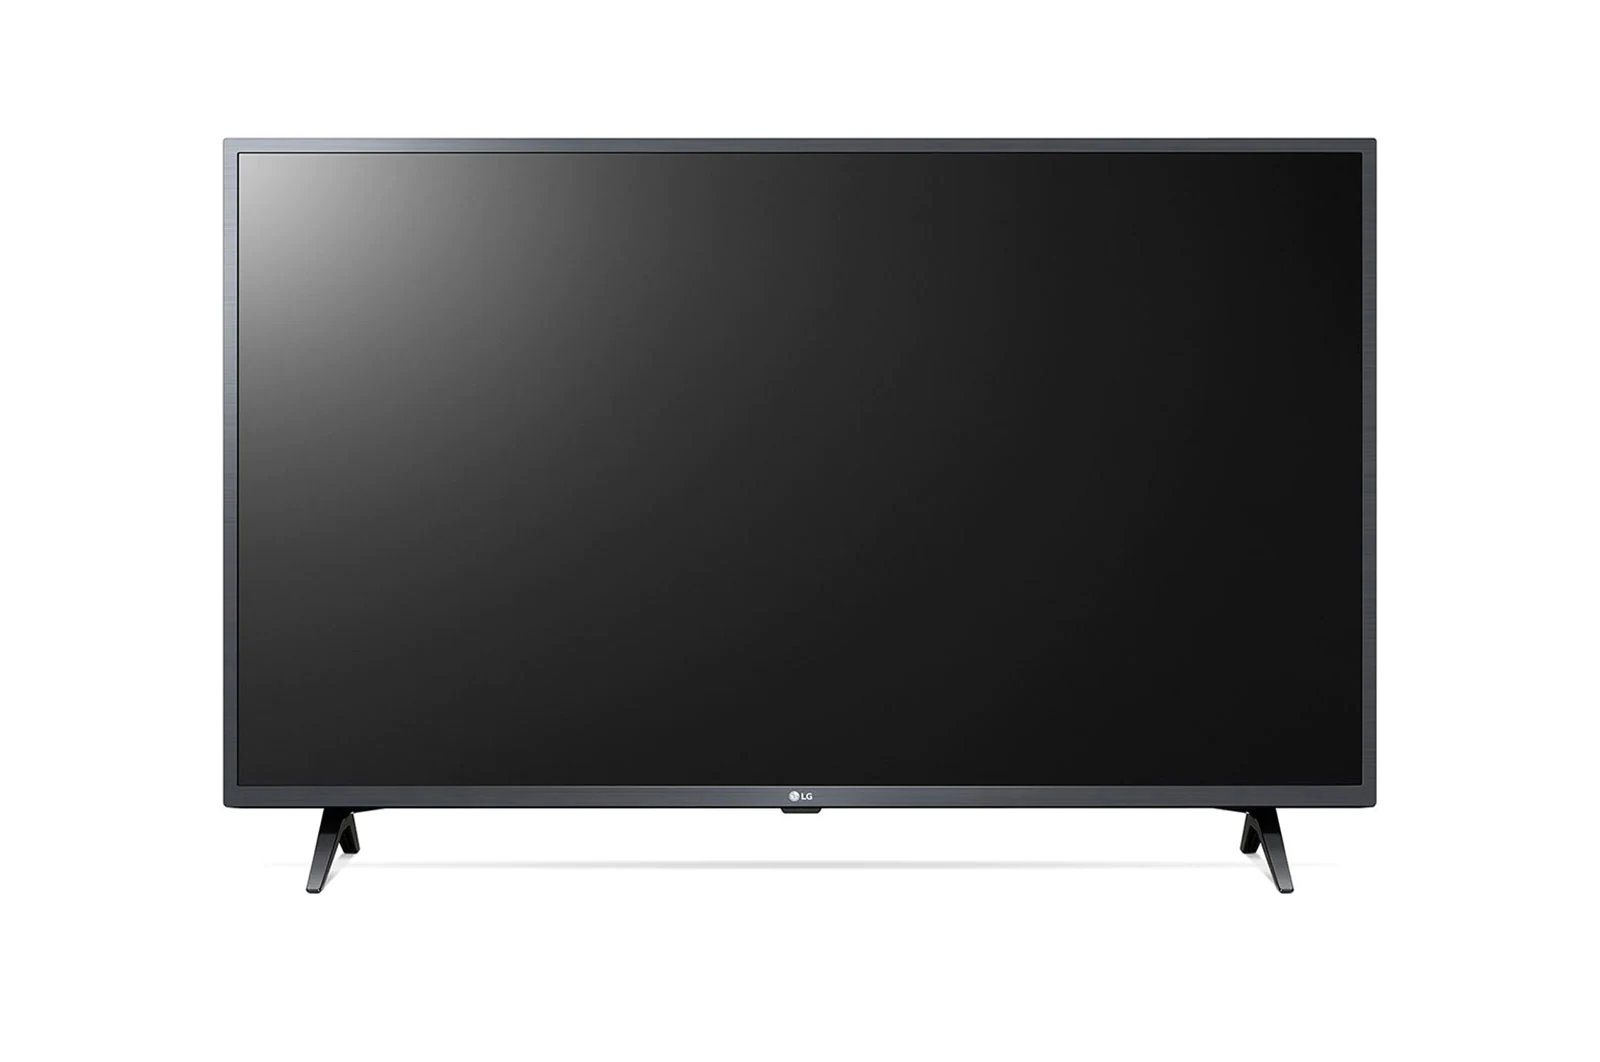 LG Smart TV, 43 inch, HDR, Full HD, Built-in Receiver, 43LM6370PVA